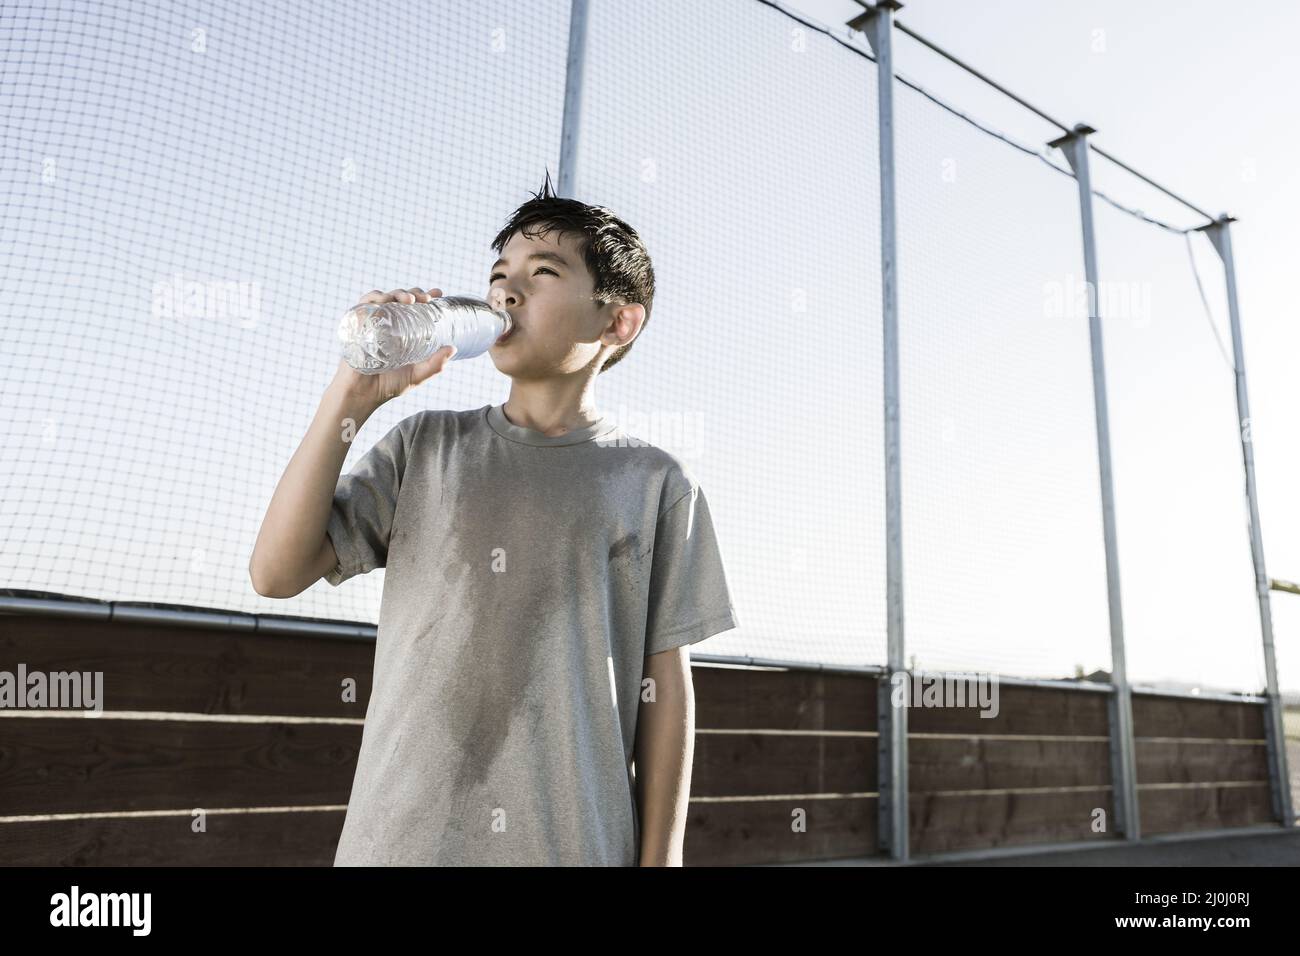 Boy drinks water on a hot day. Stock Photo